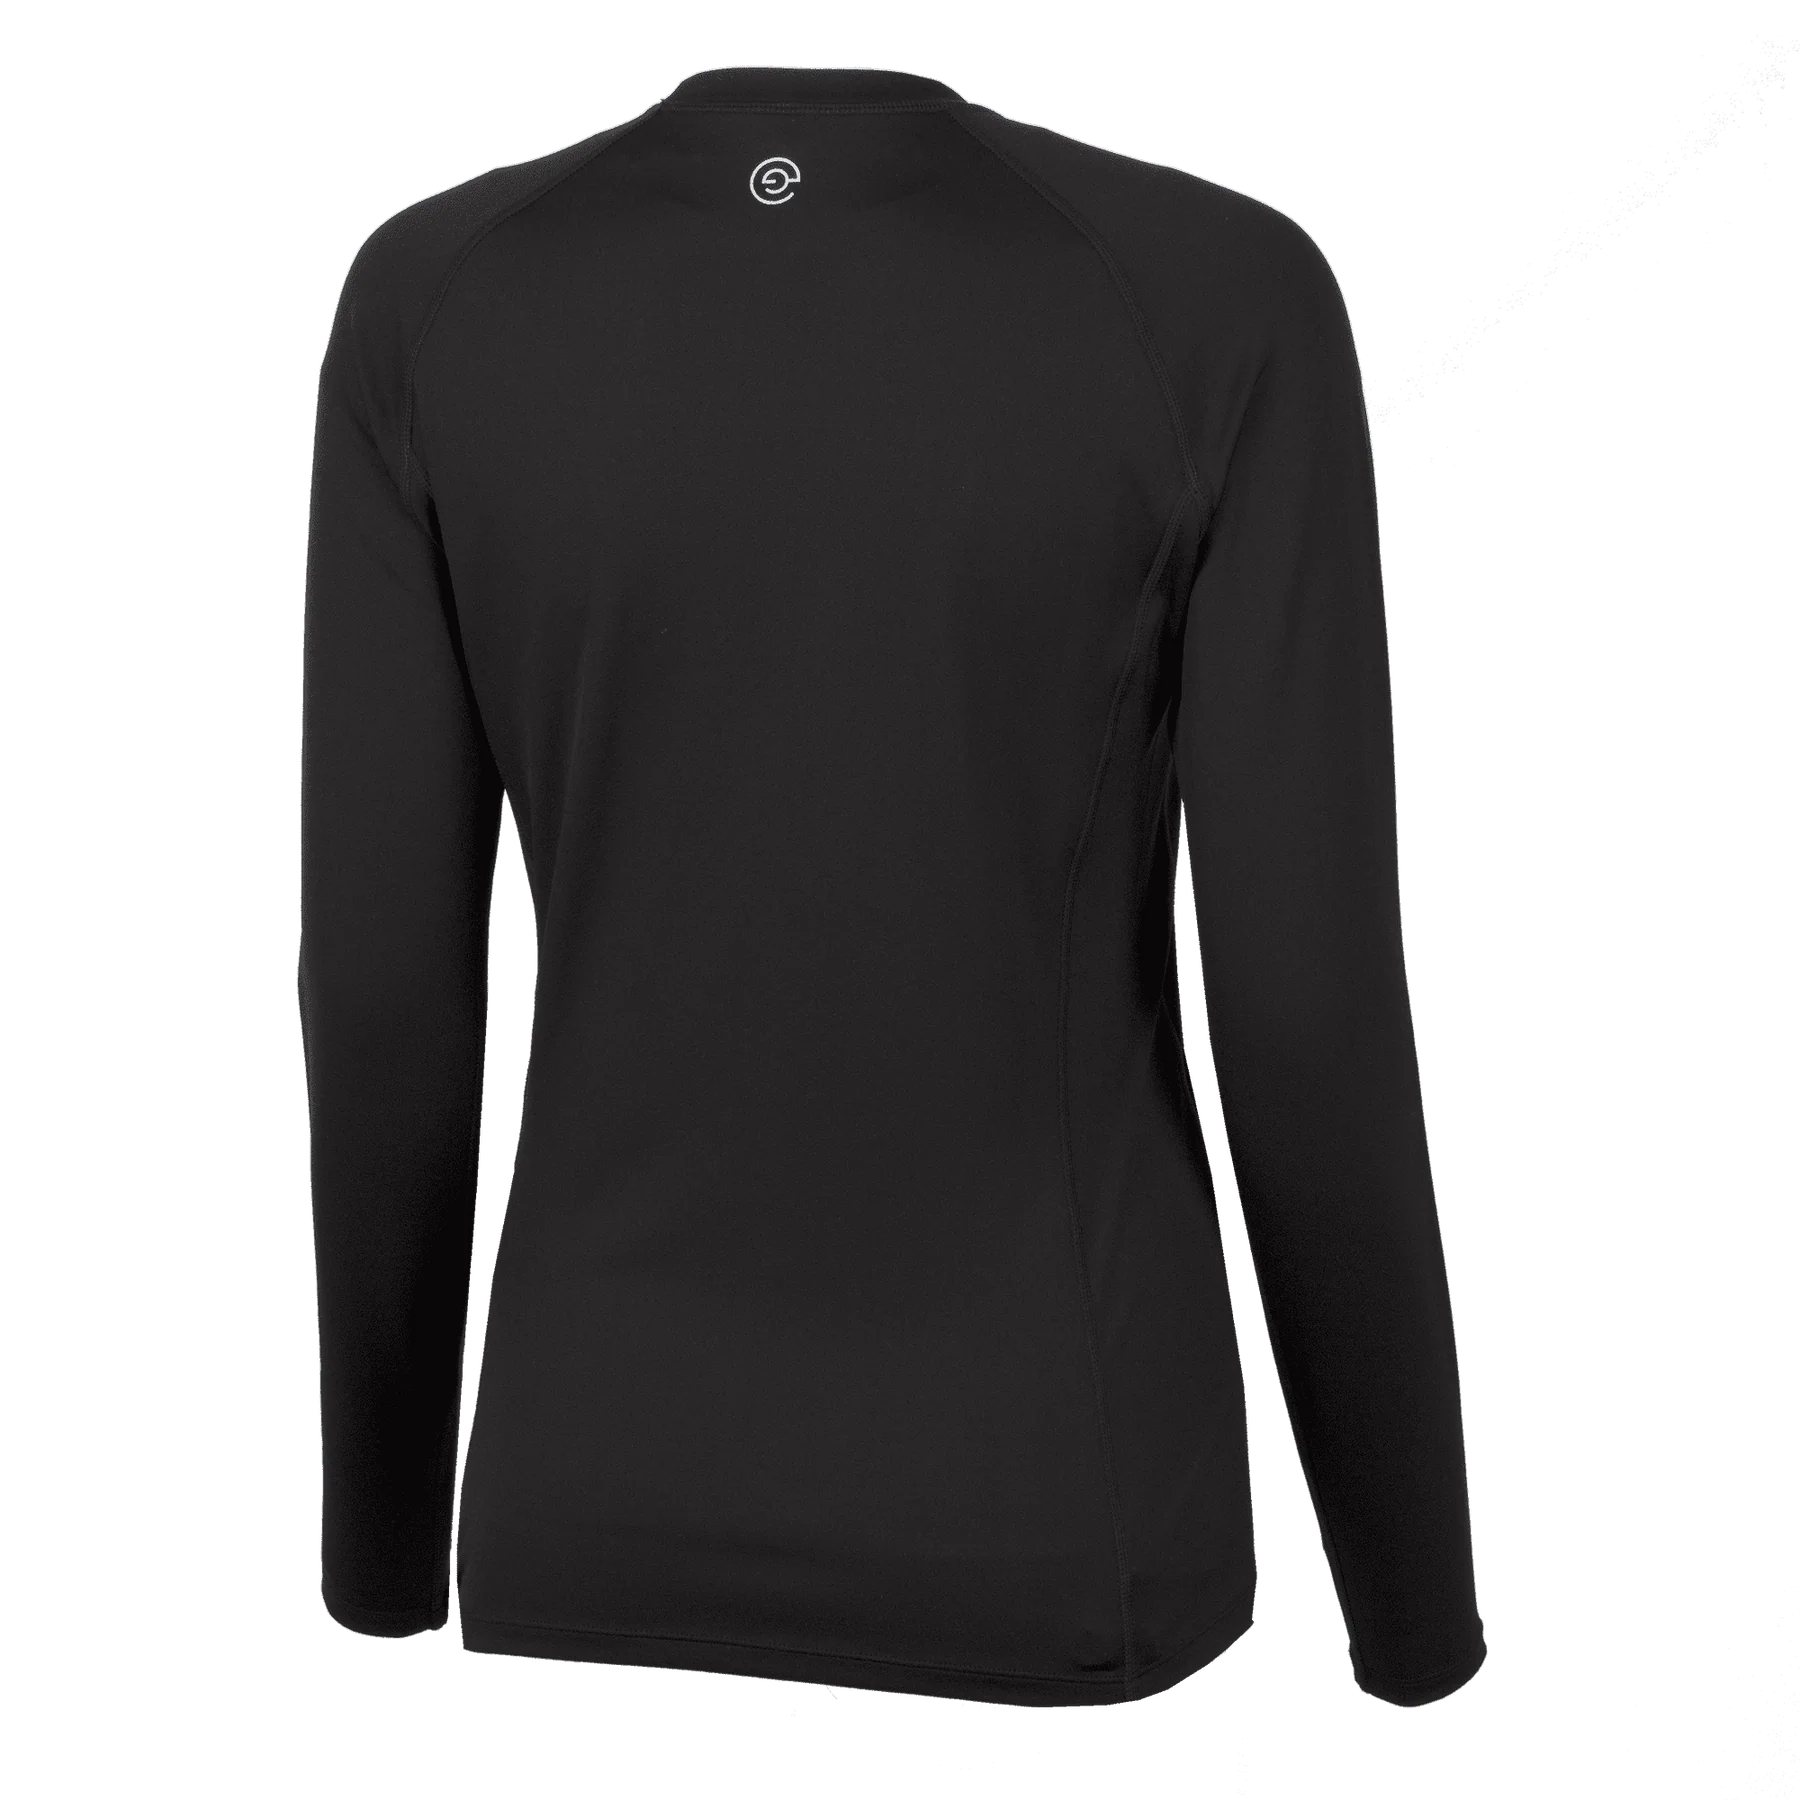 GALVIN GREEN WOMEN'S ELAINE THERMAL BASE LAYER TOP